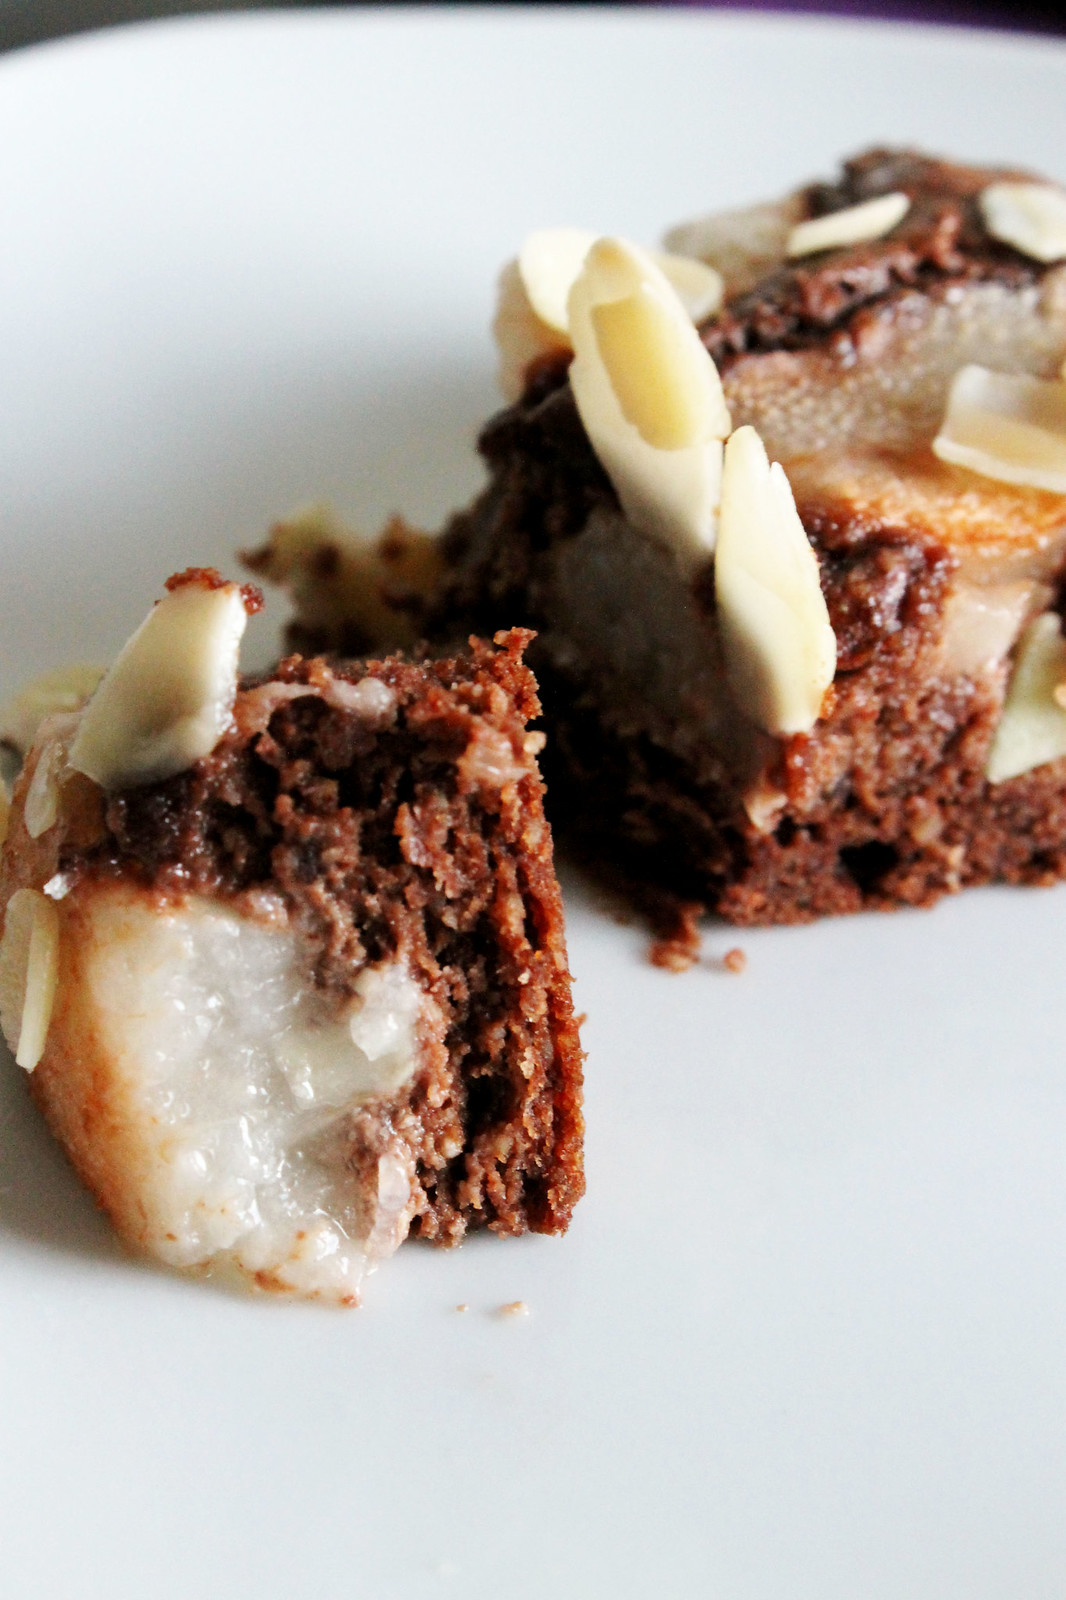 Pear and Almond Chocolate Torte